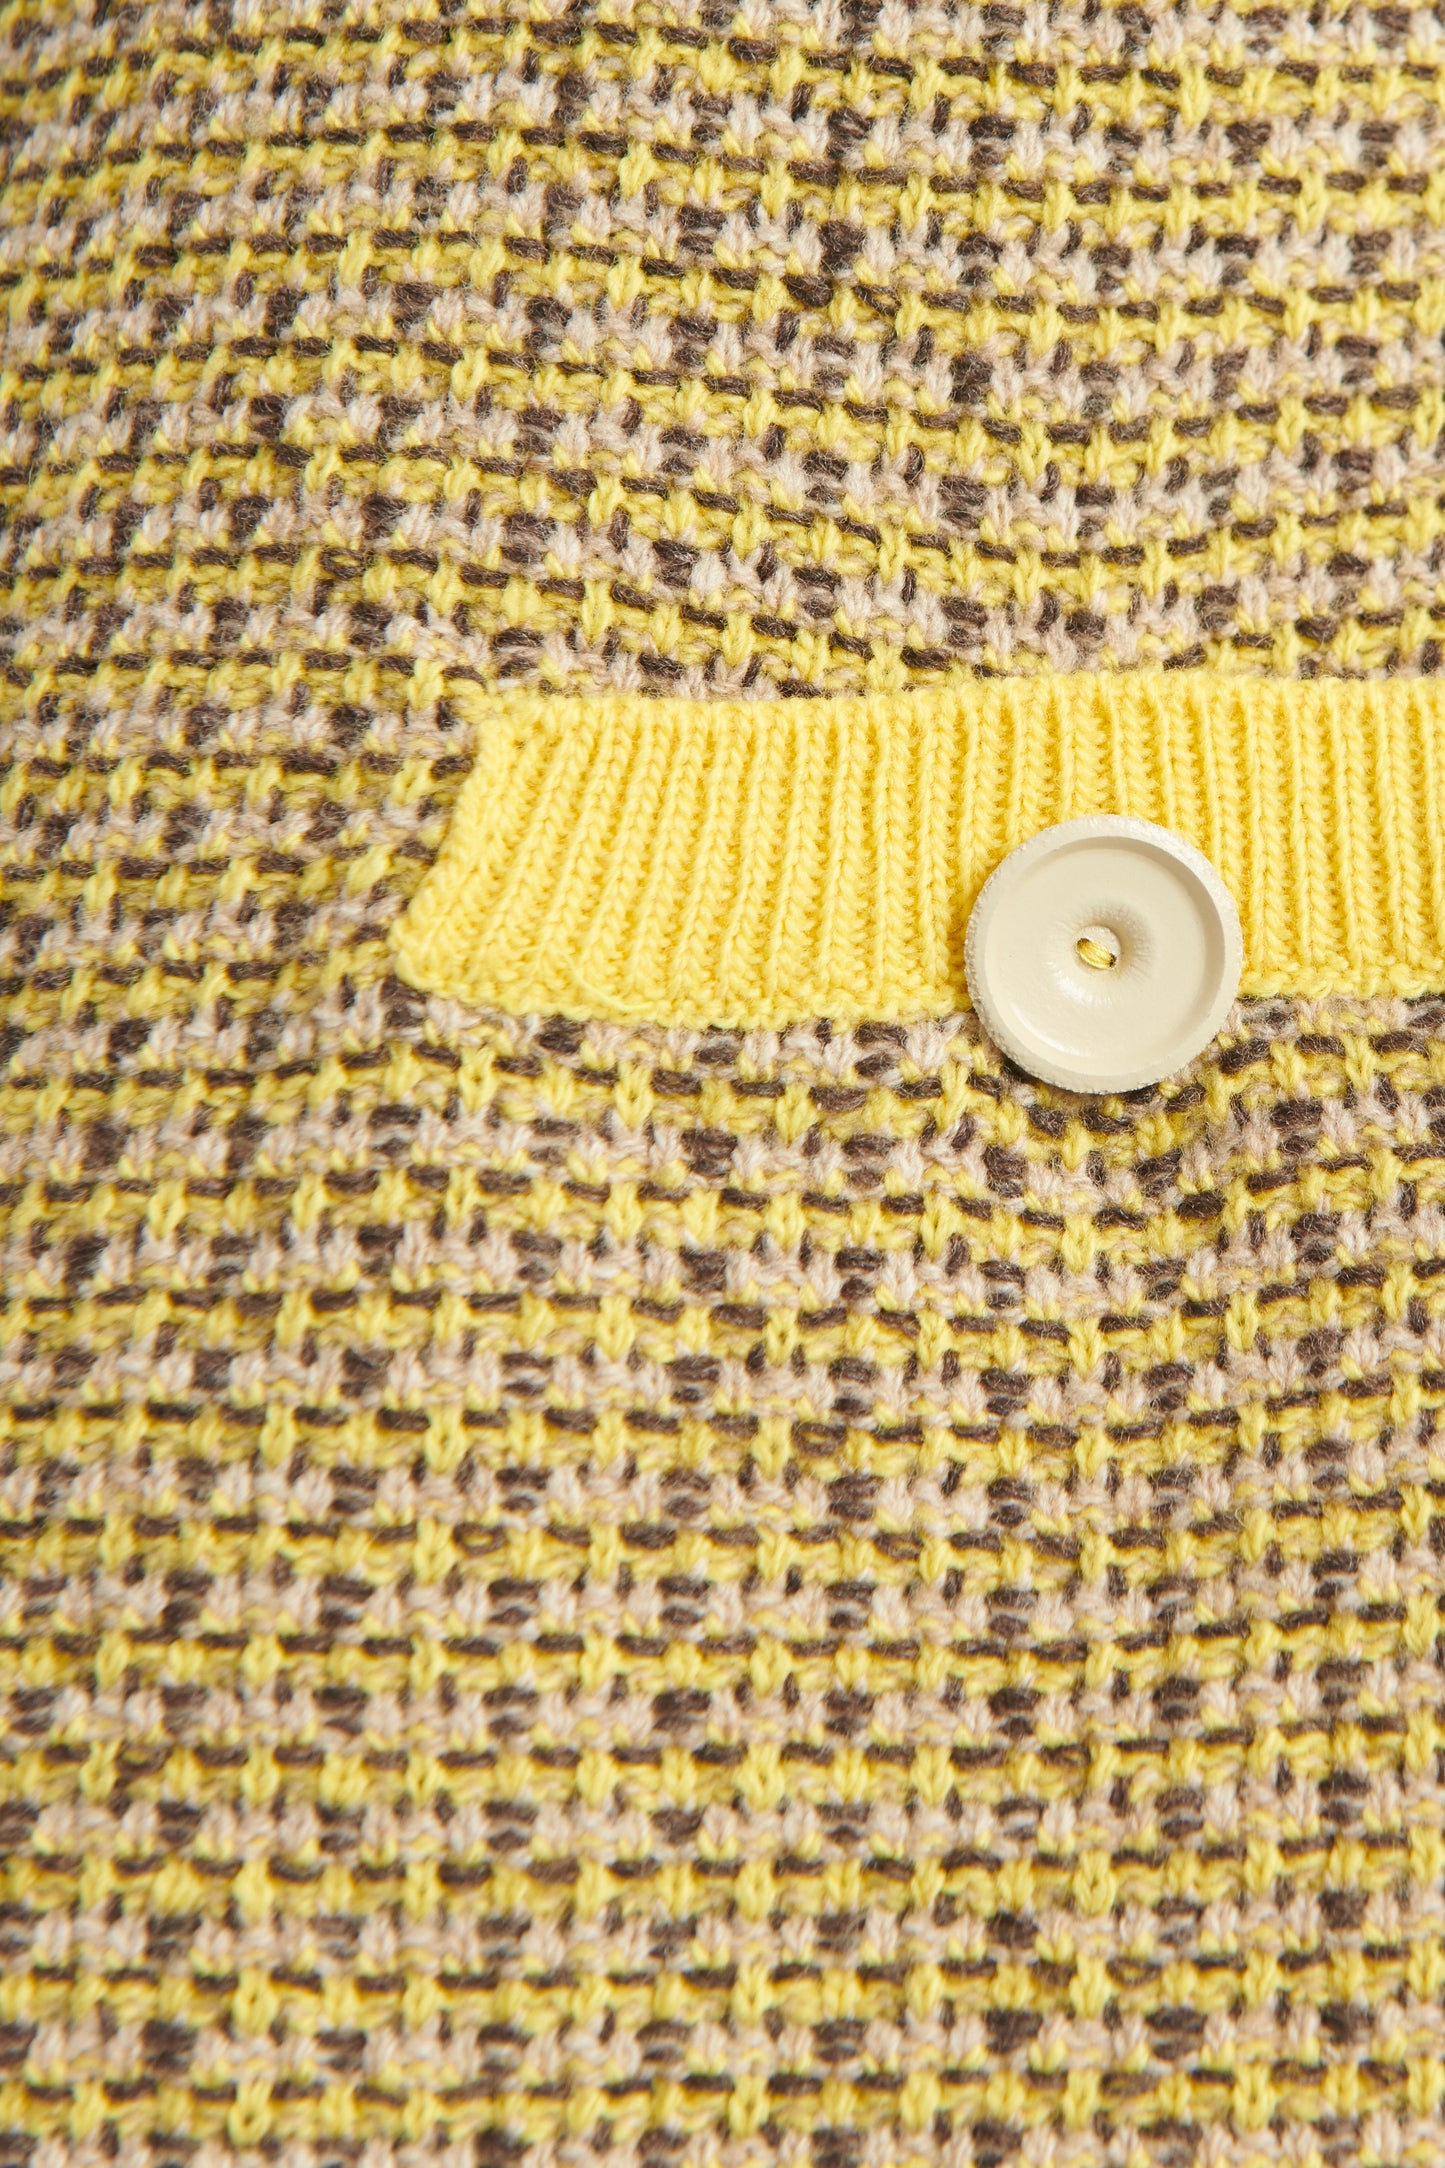 Yellow Patterned Wool Preowned Sleeveless Cardigan